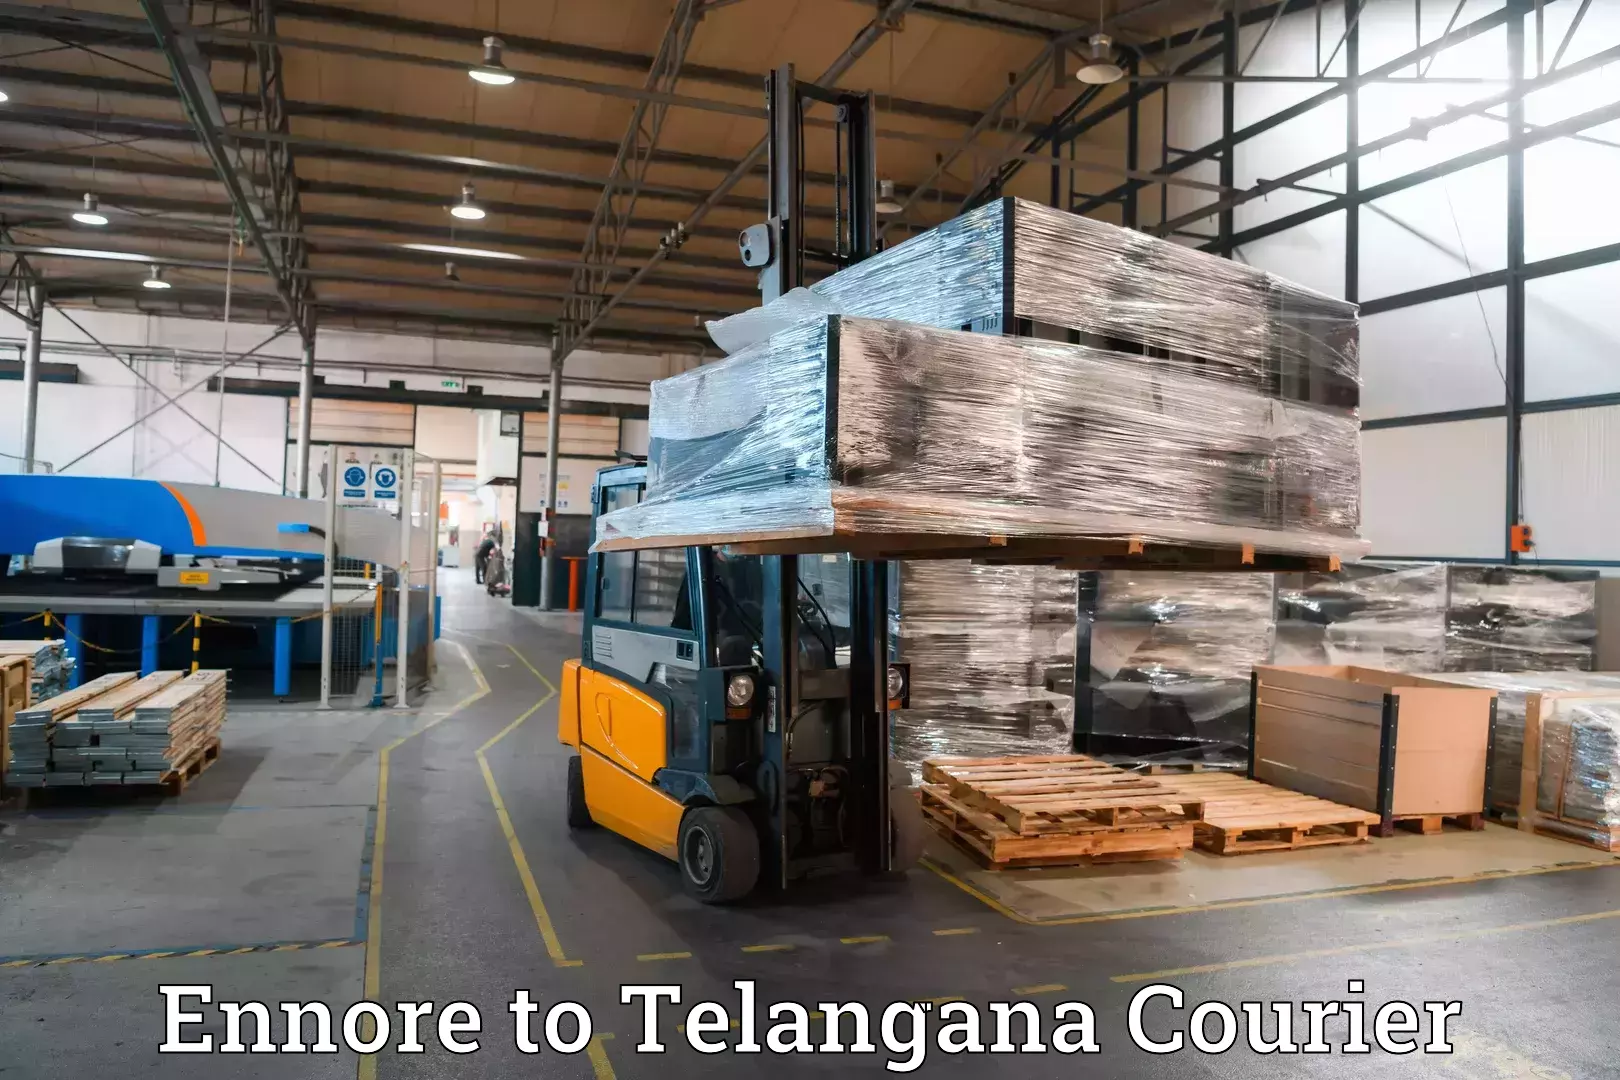 Luggage shipment tracking Ennore to Narayanpet